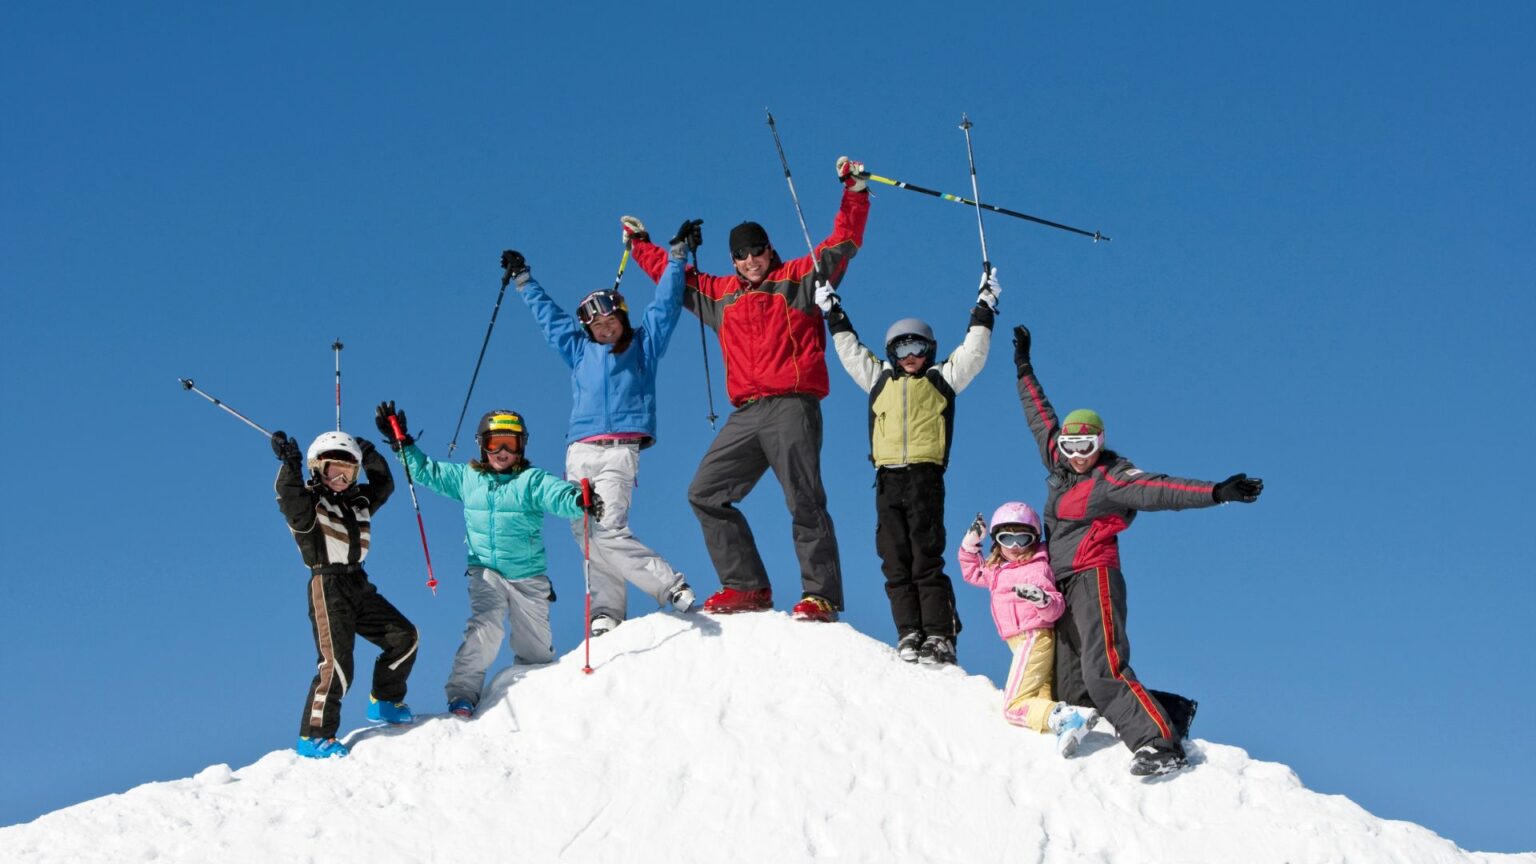 Skiing for Children: At What Age and What Benefits